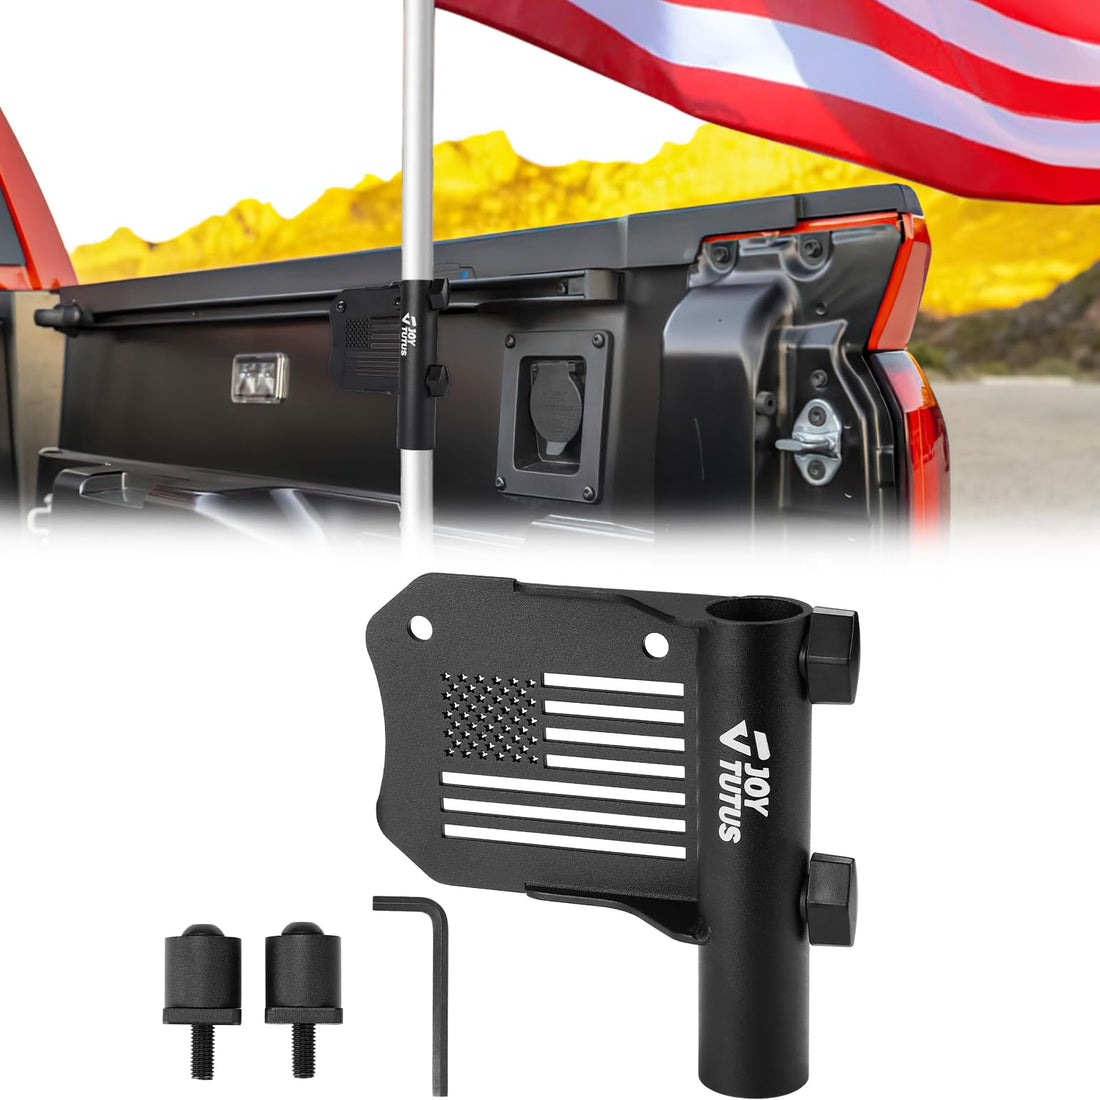 JOYTUTUS Truck Bed Flag Pole Mount Fit for Tacoma & Tundra, Fits Up to 1.18 Inch Diameter Flagpole